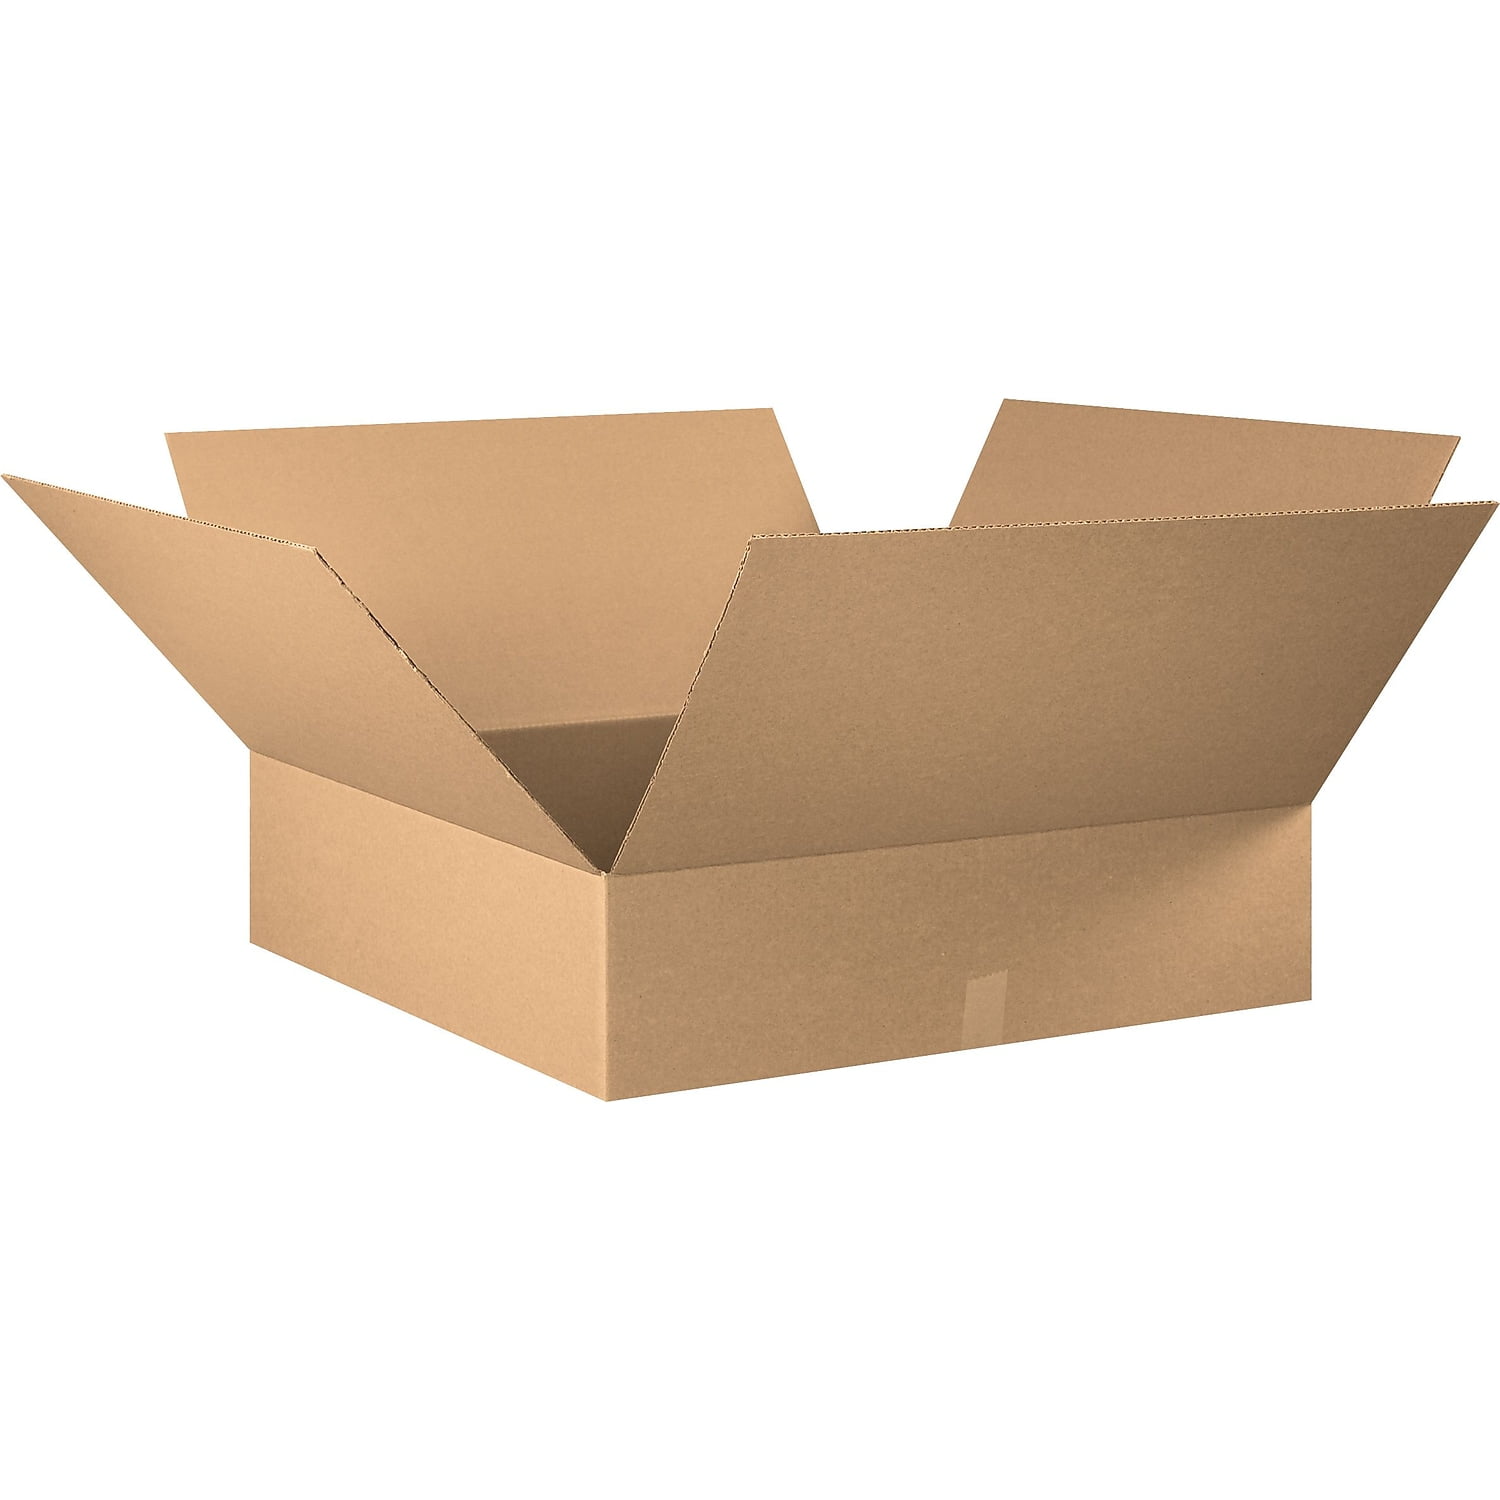 30 x Small Cube Mail Packing Cardboard Boxes 12 x 12 x 12" DW 